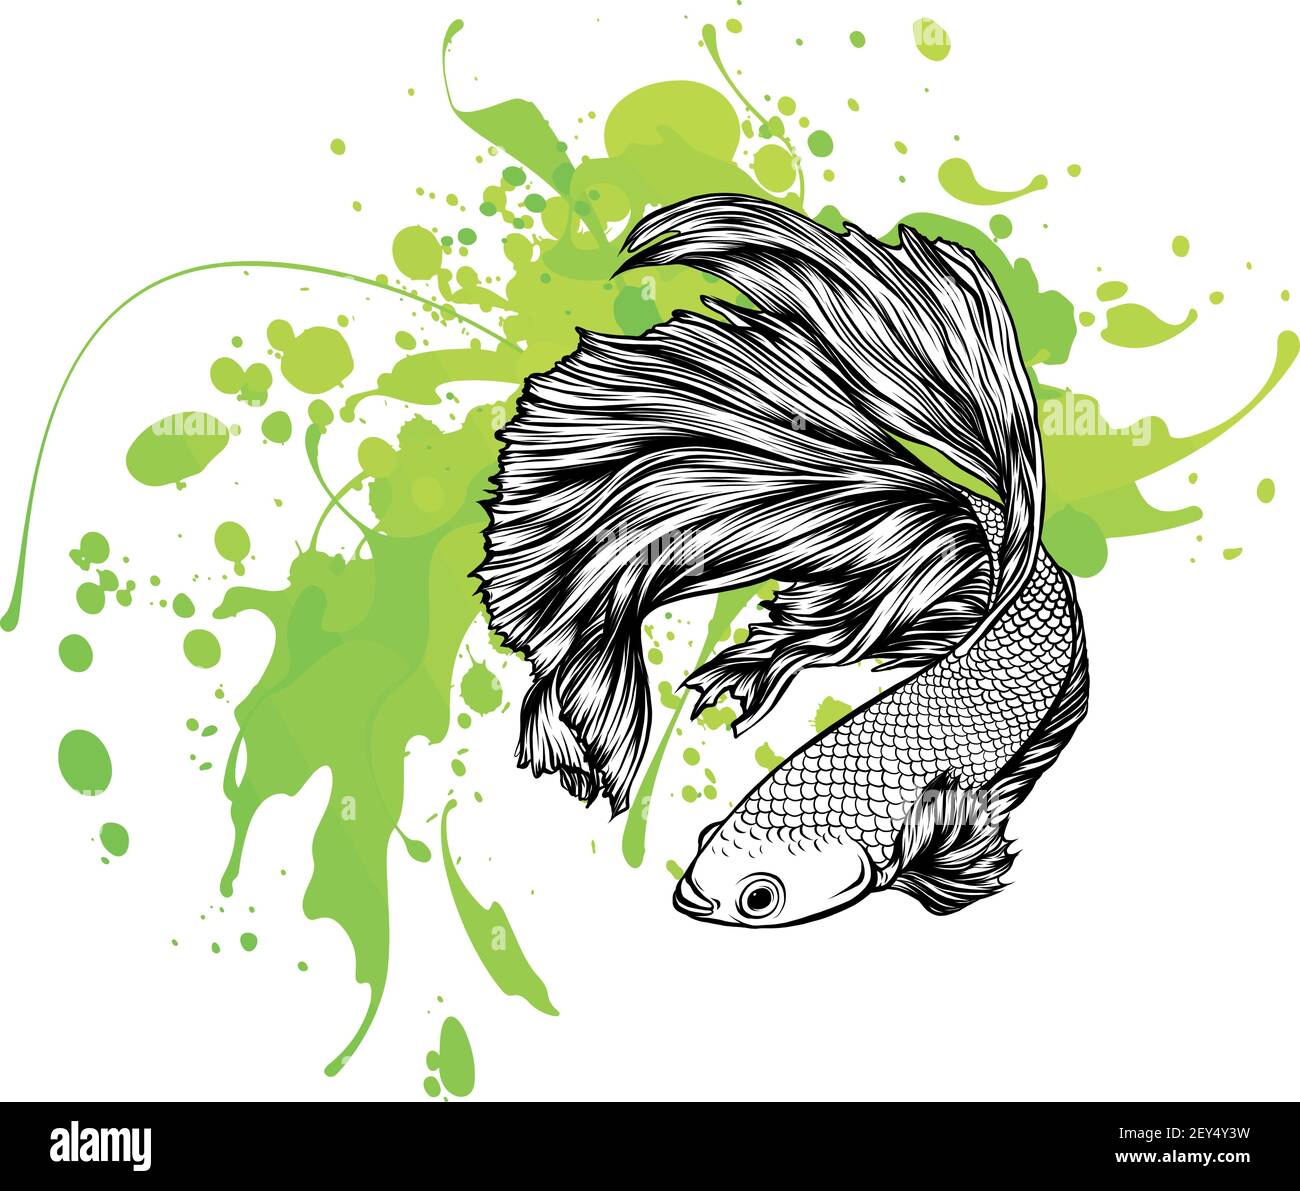 Colorful Betta Fish with green water splash Vector Illustration. Stock Vector